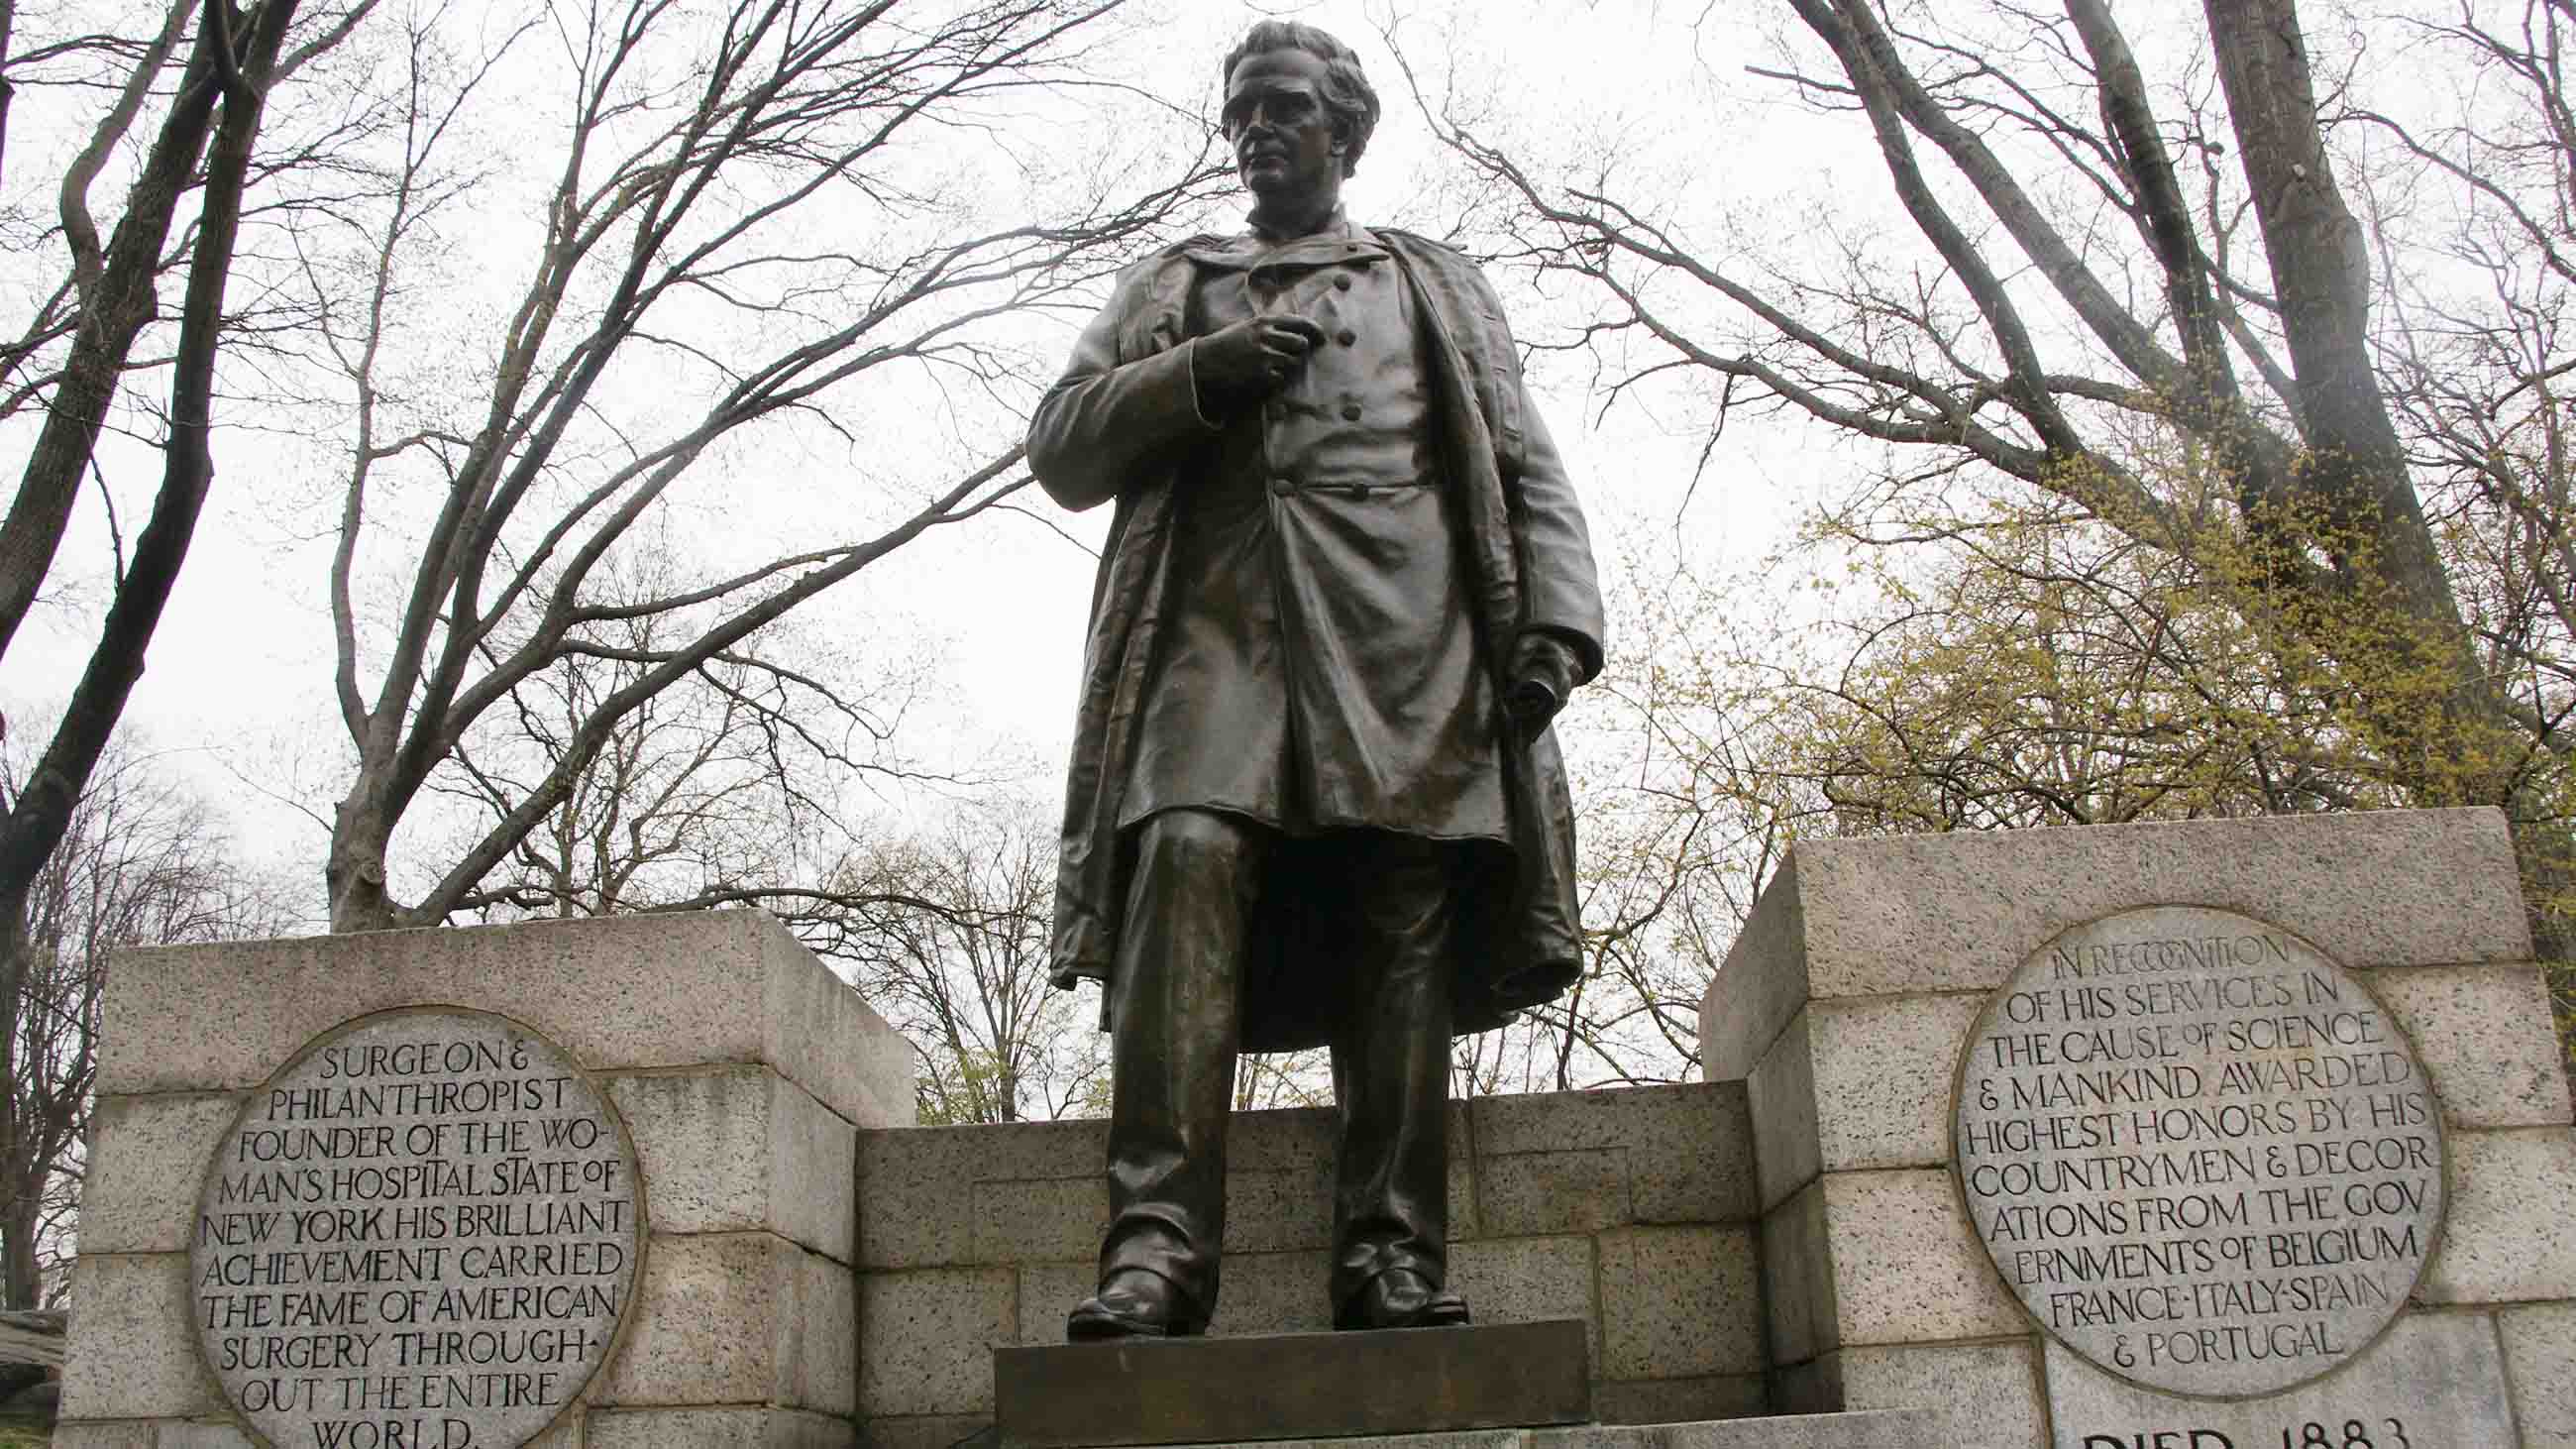 J. Marion Sims, a 19th-century gynecologist who performed experimental surgeries without anesthesia on the bodies of enslaved women, is honored with a large statue in New York City’s Central Park. Should that come down?